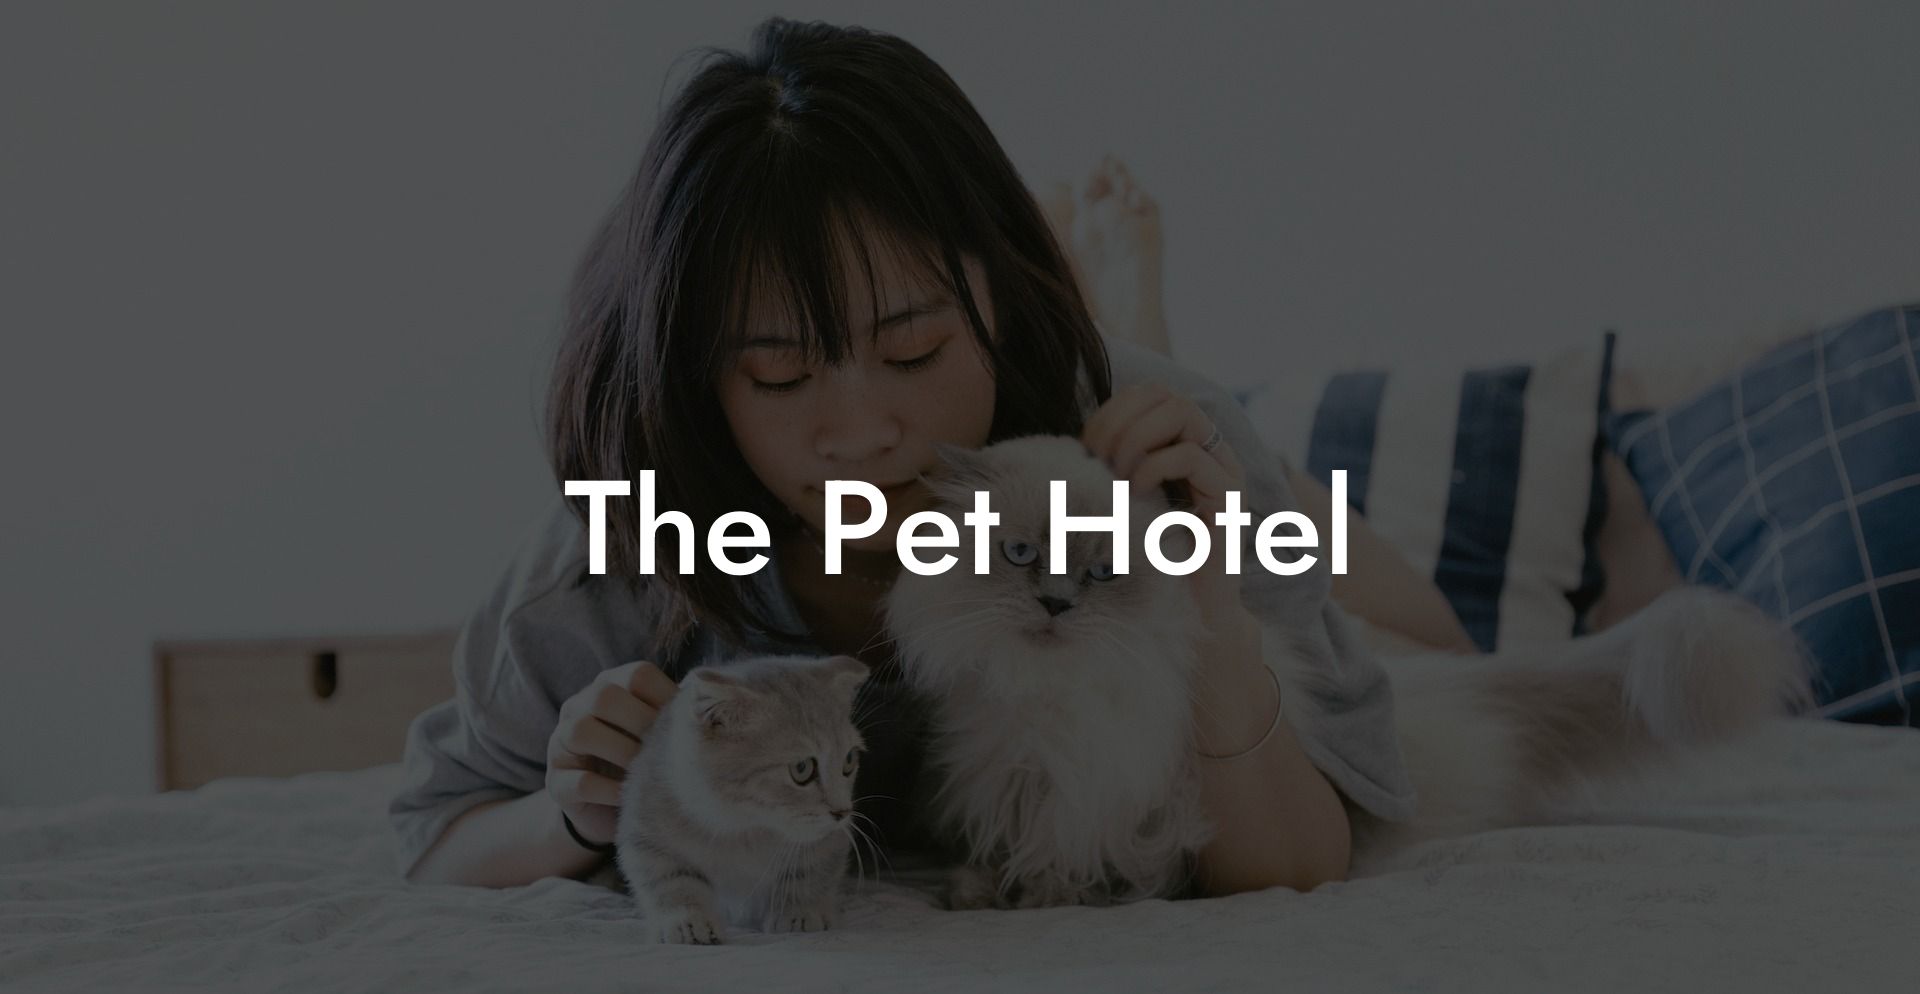 The Pet Hotel